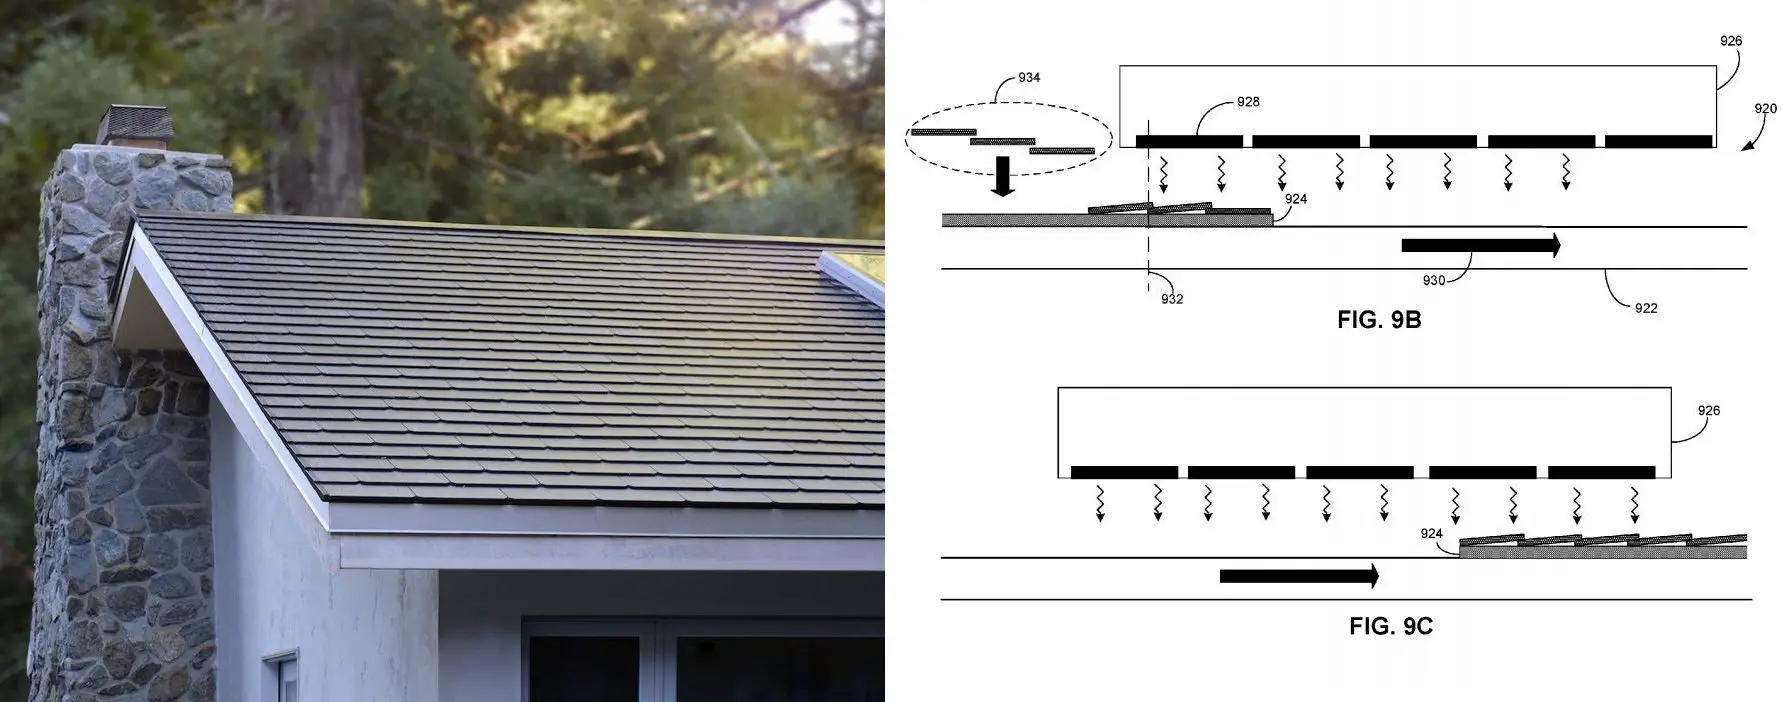 Tesla solar roof tile connector system explained in new patent